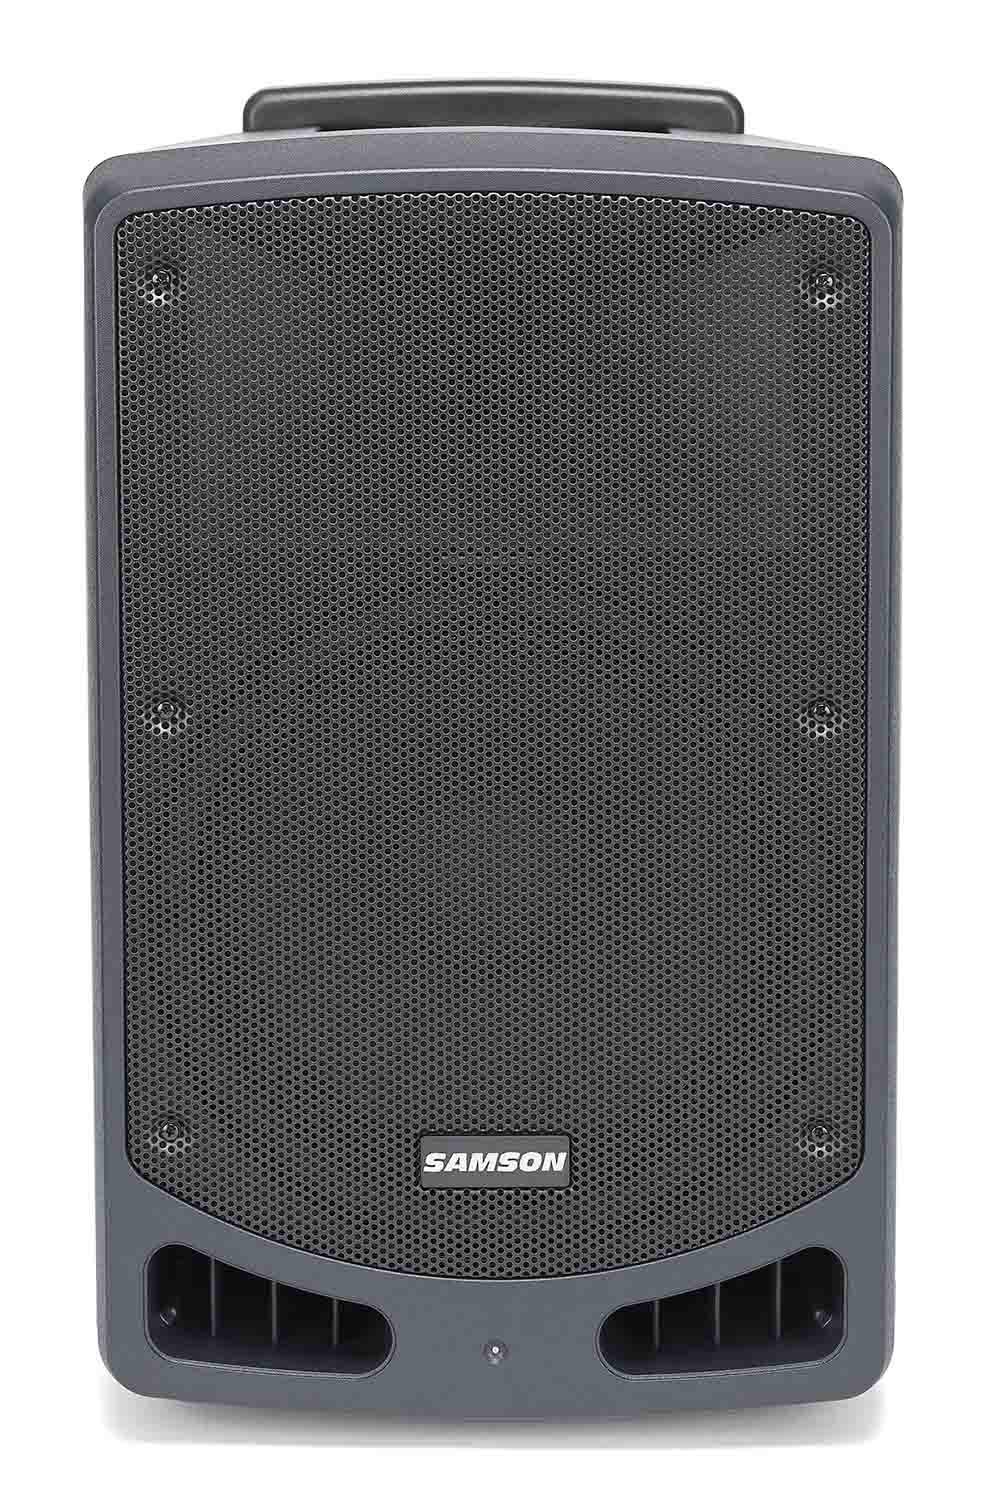 Samson Expedition XP312w K-band Rechargeable Portable PA with Handheld Wireless System and Bluetooth - Hollywood DJ